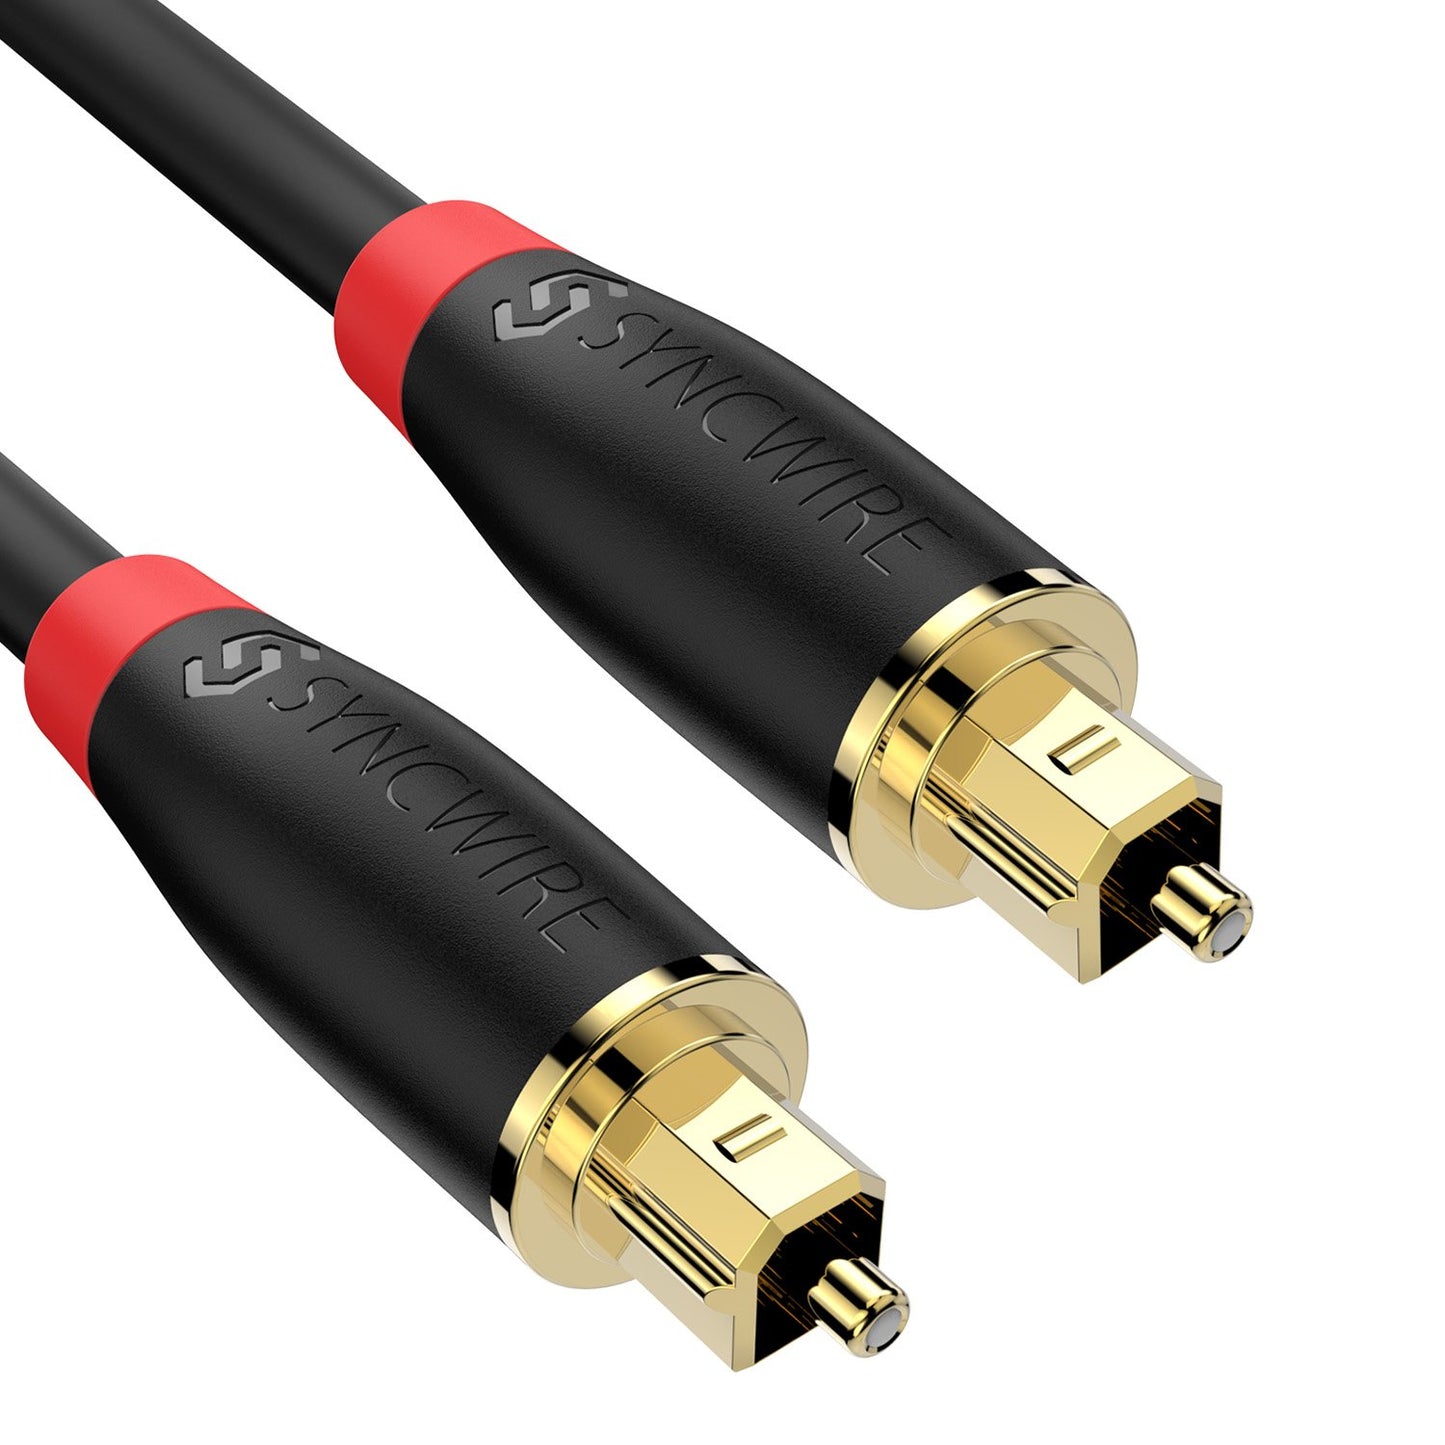 Syncwire Digital Optical Audio Cable 15 Feet - Toslink Cable [24K Gold-Plated, Ultra-Durable] Fiber Optic Male to Male Optical Cord for Home Theater, Sound Bar, TV, PS4, Xbox, Playstation & More